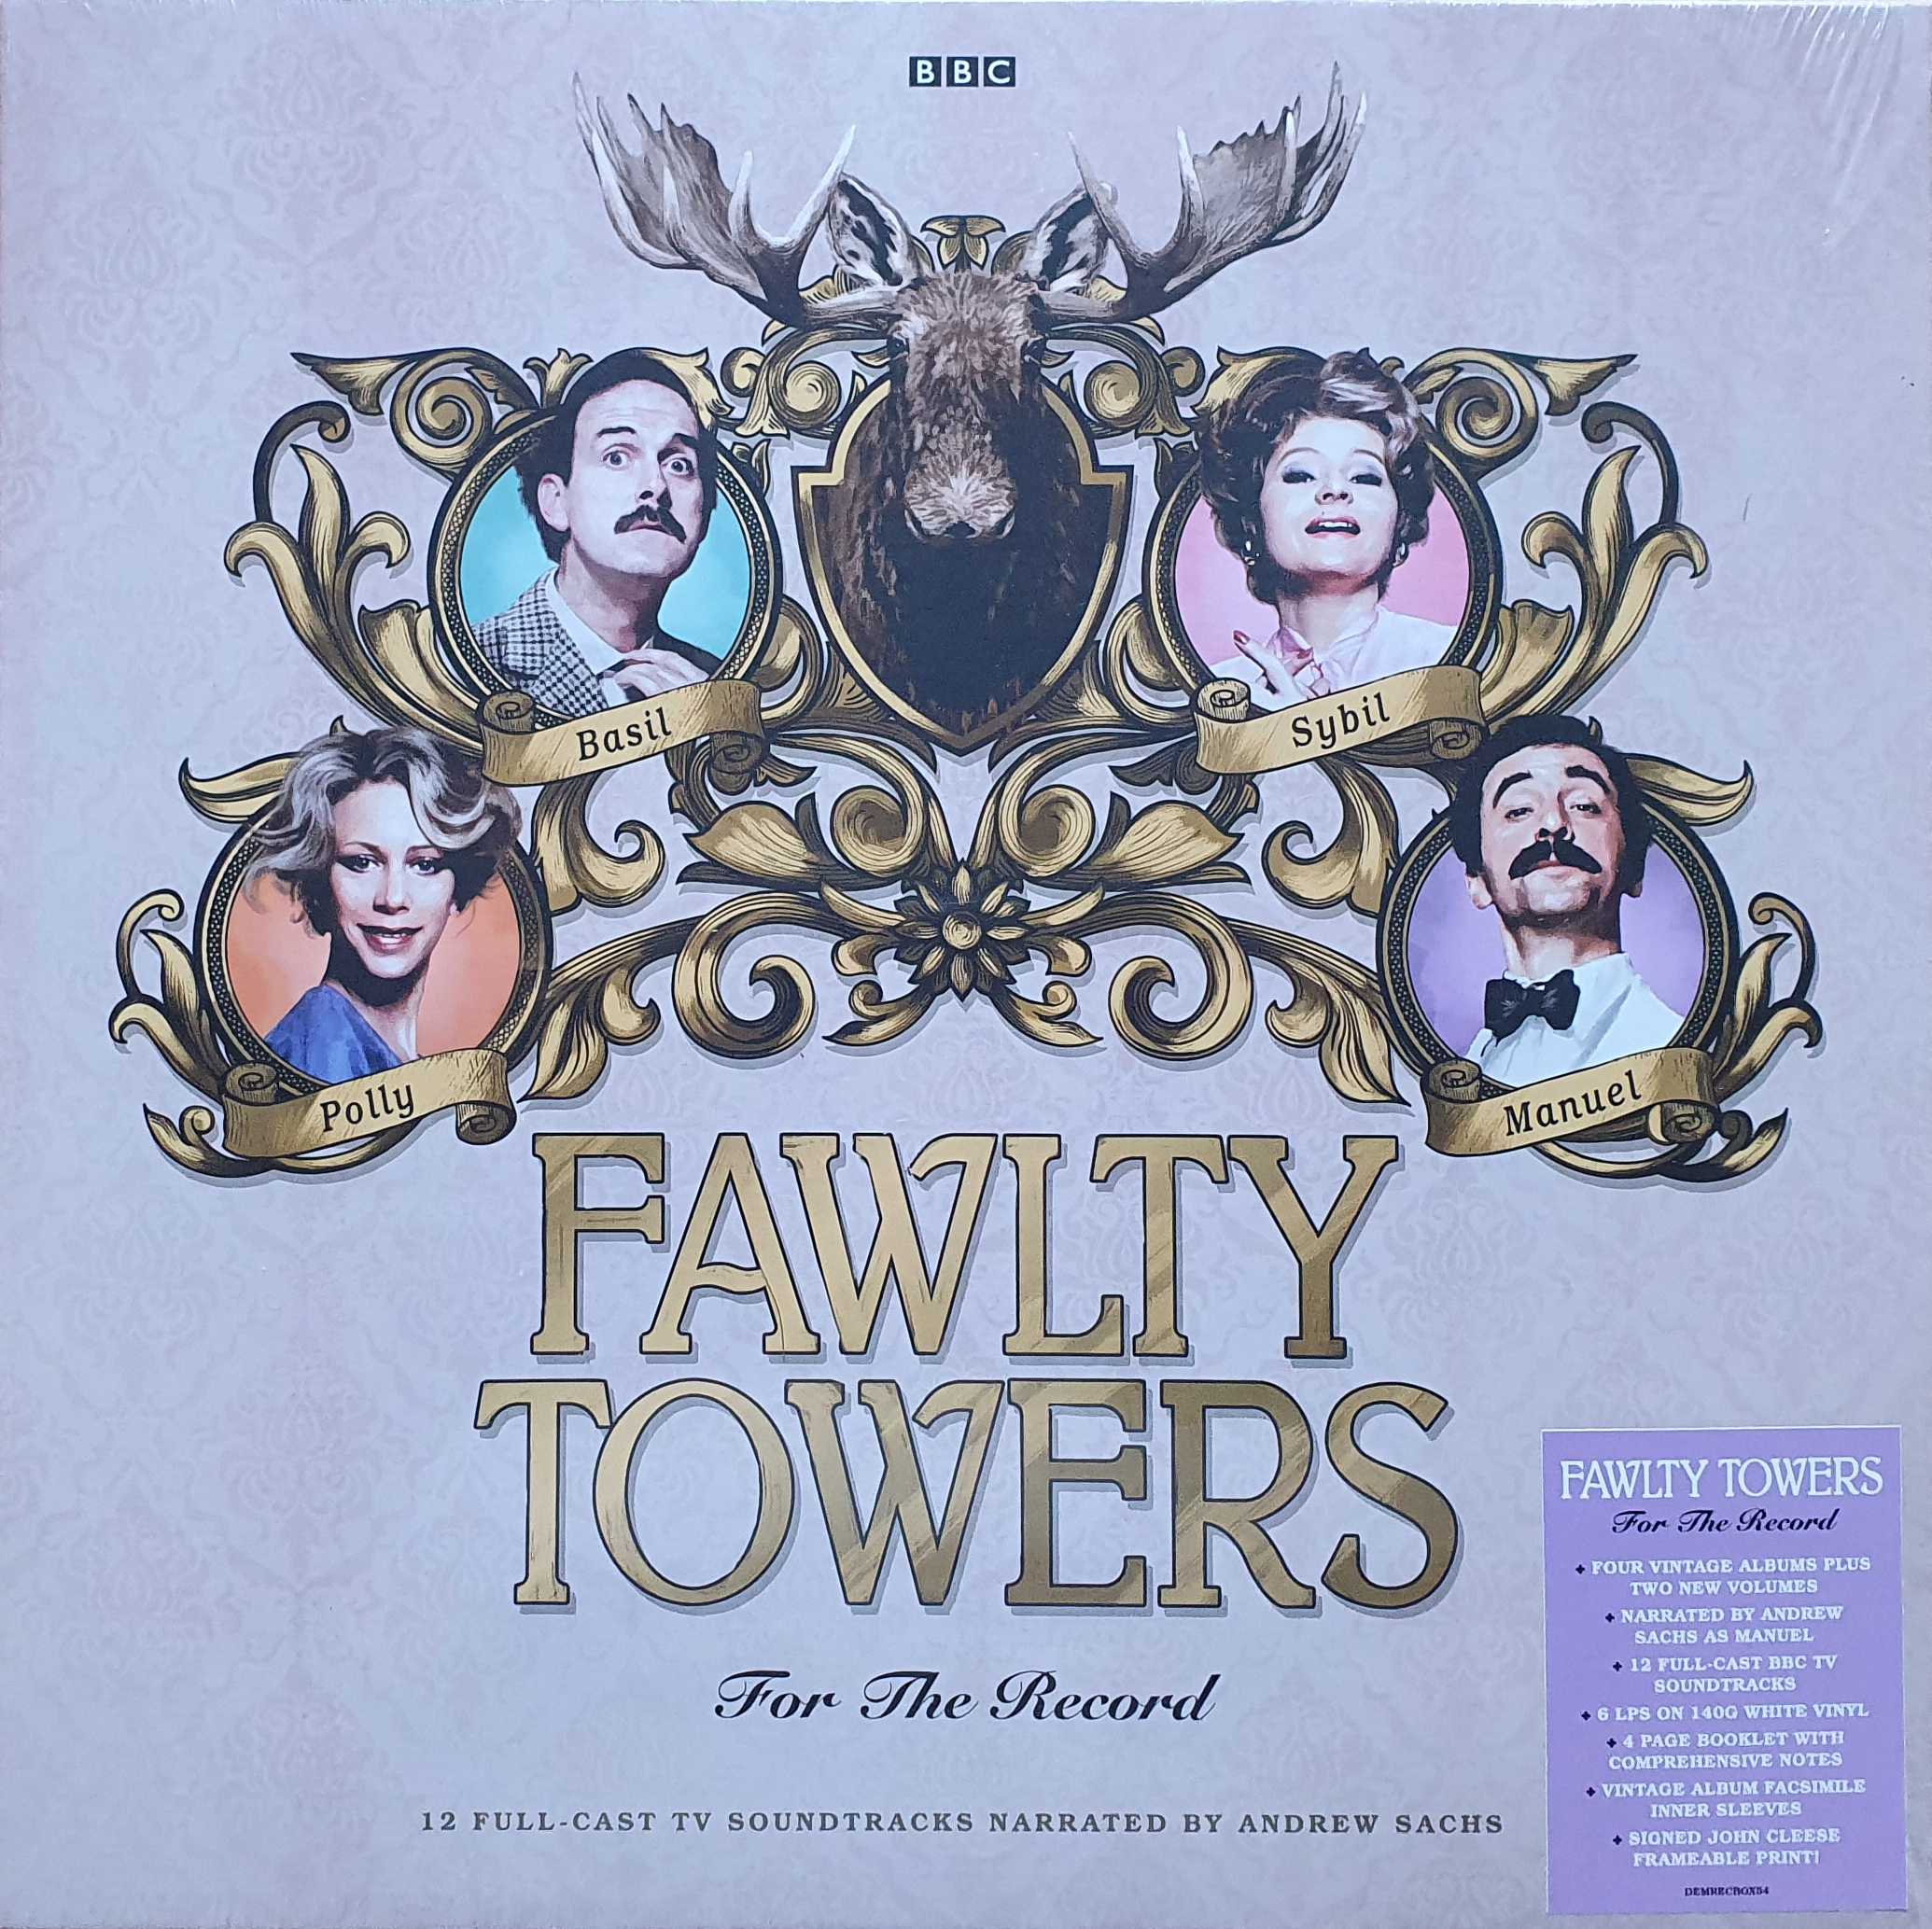 Picture of Fawlty Towers - For the record by artist John Cleese / Connie Booth from the BBC albums - Records and Tapes library